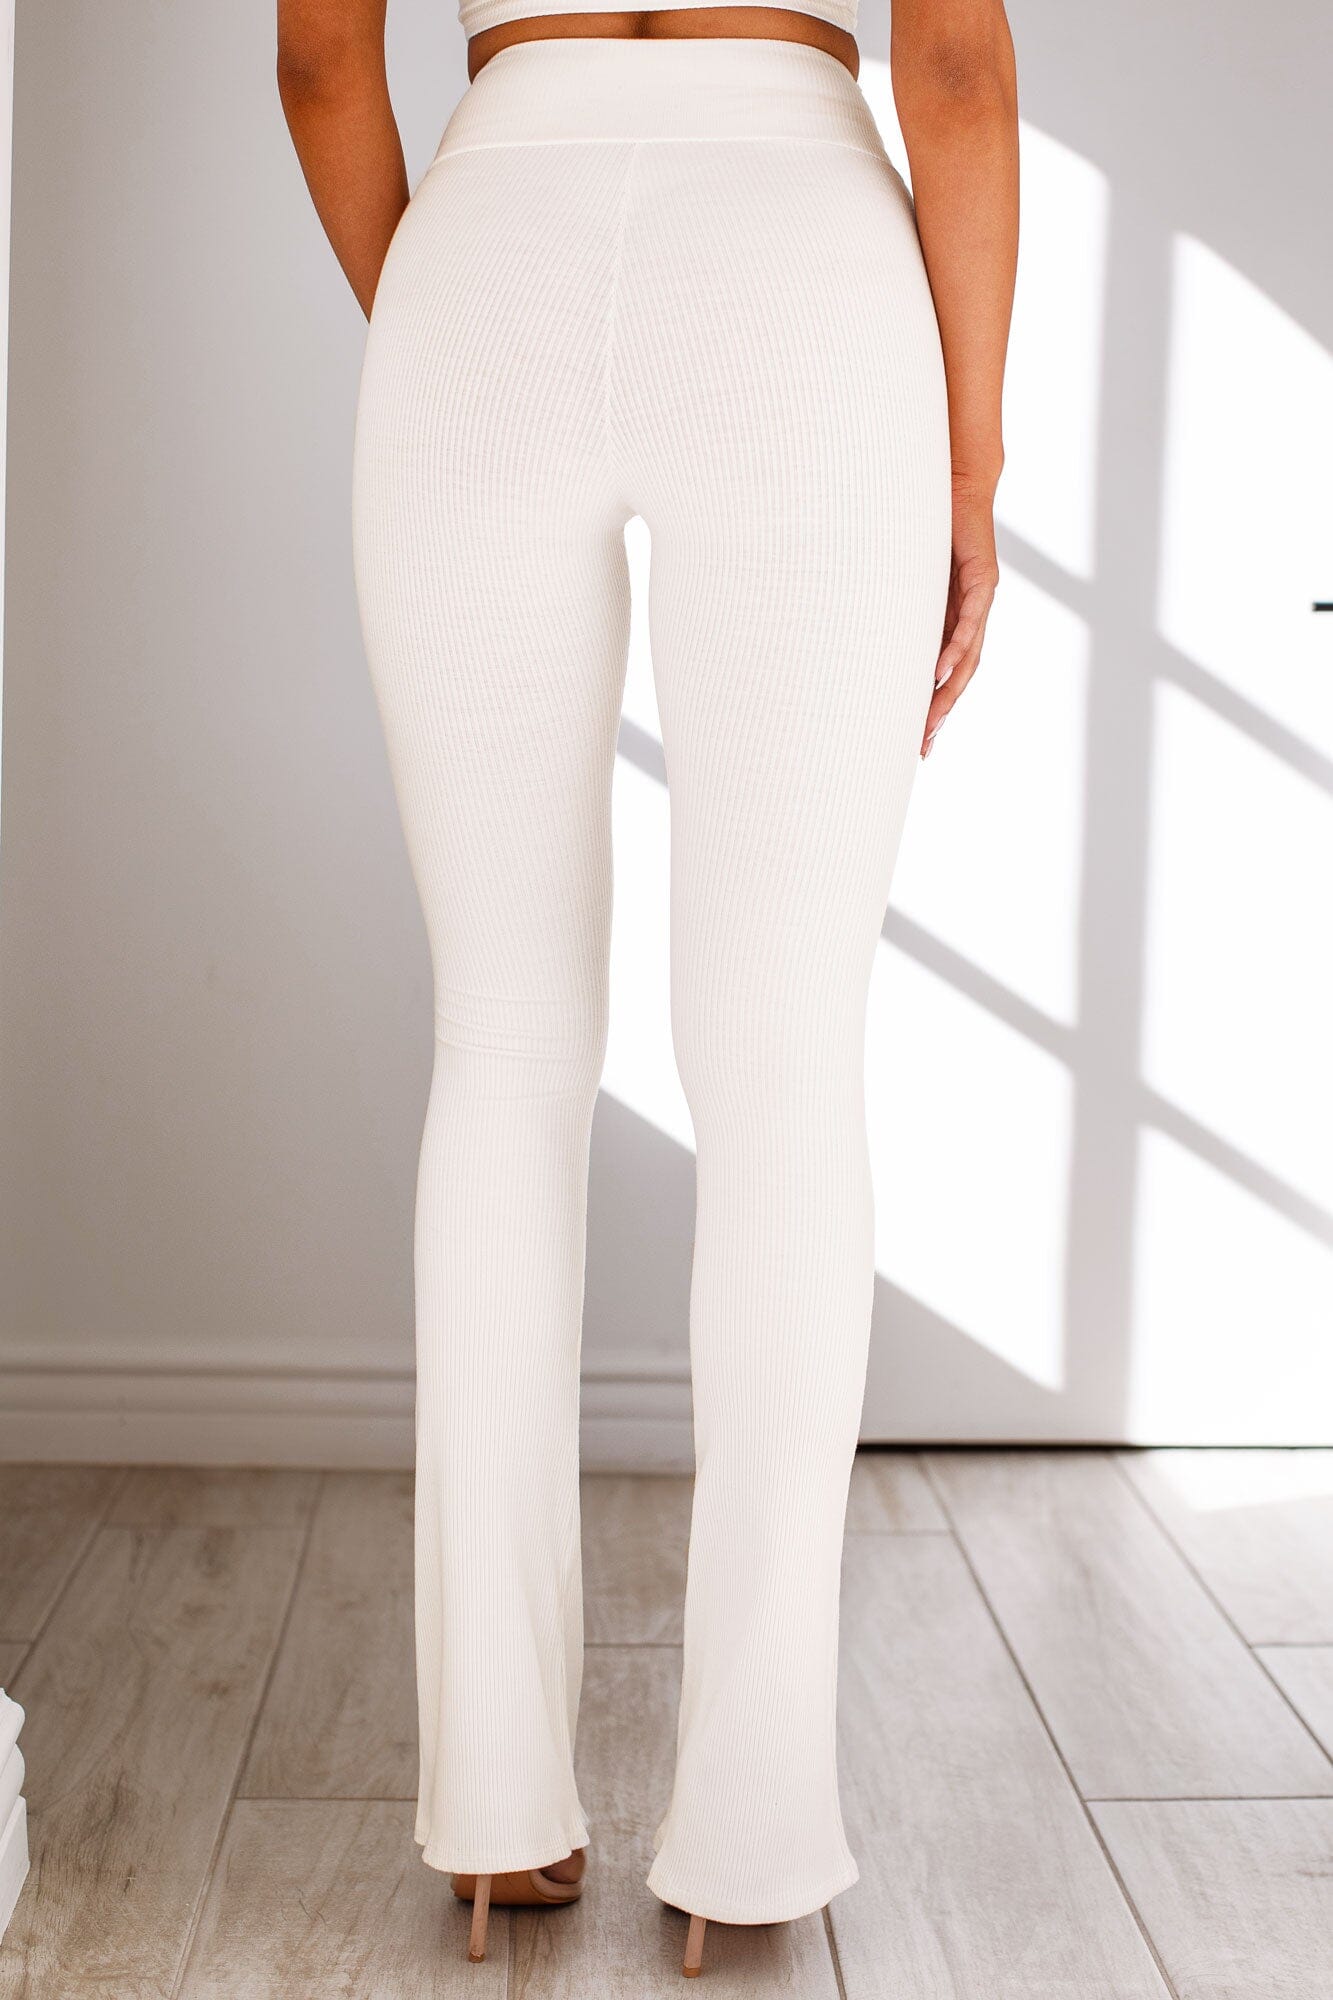 Buy Kica High Waisted Flare Pants in Second SKN Fabric With Pockets Online